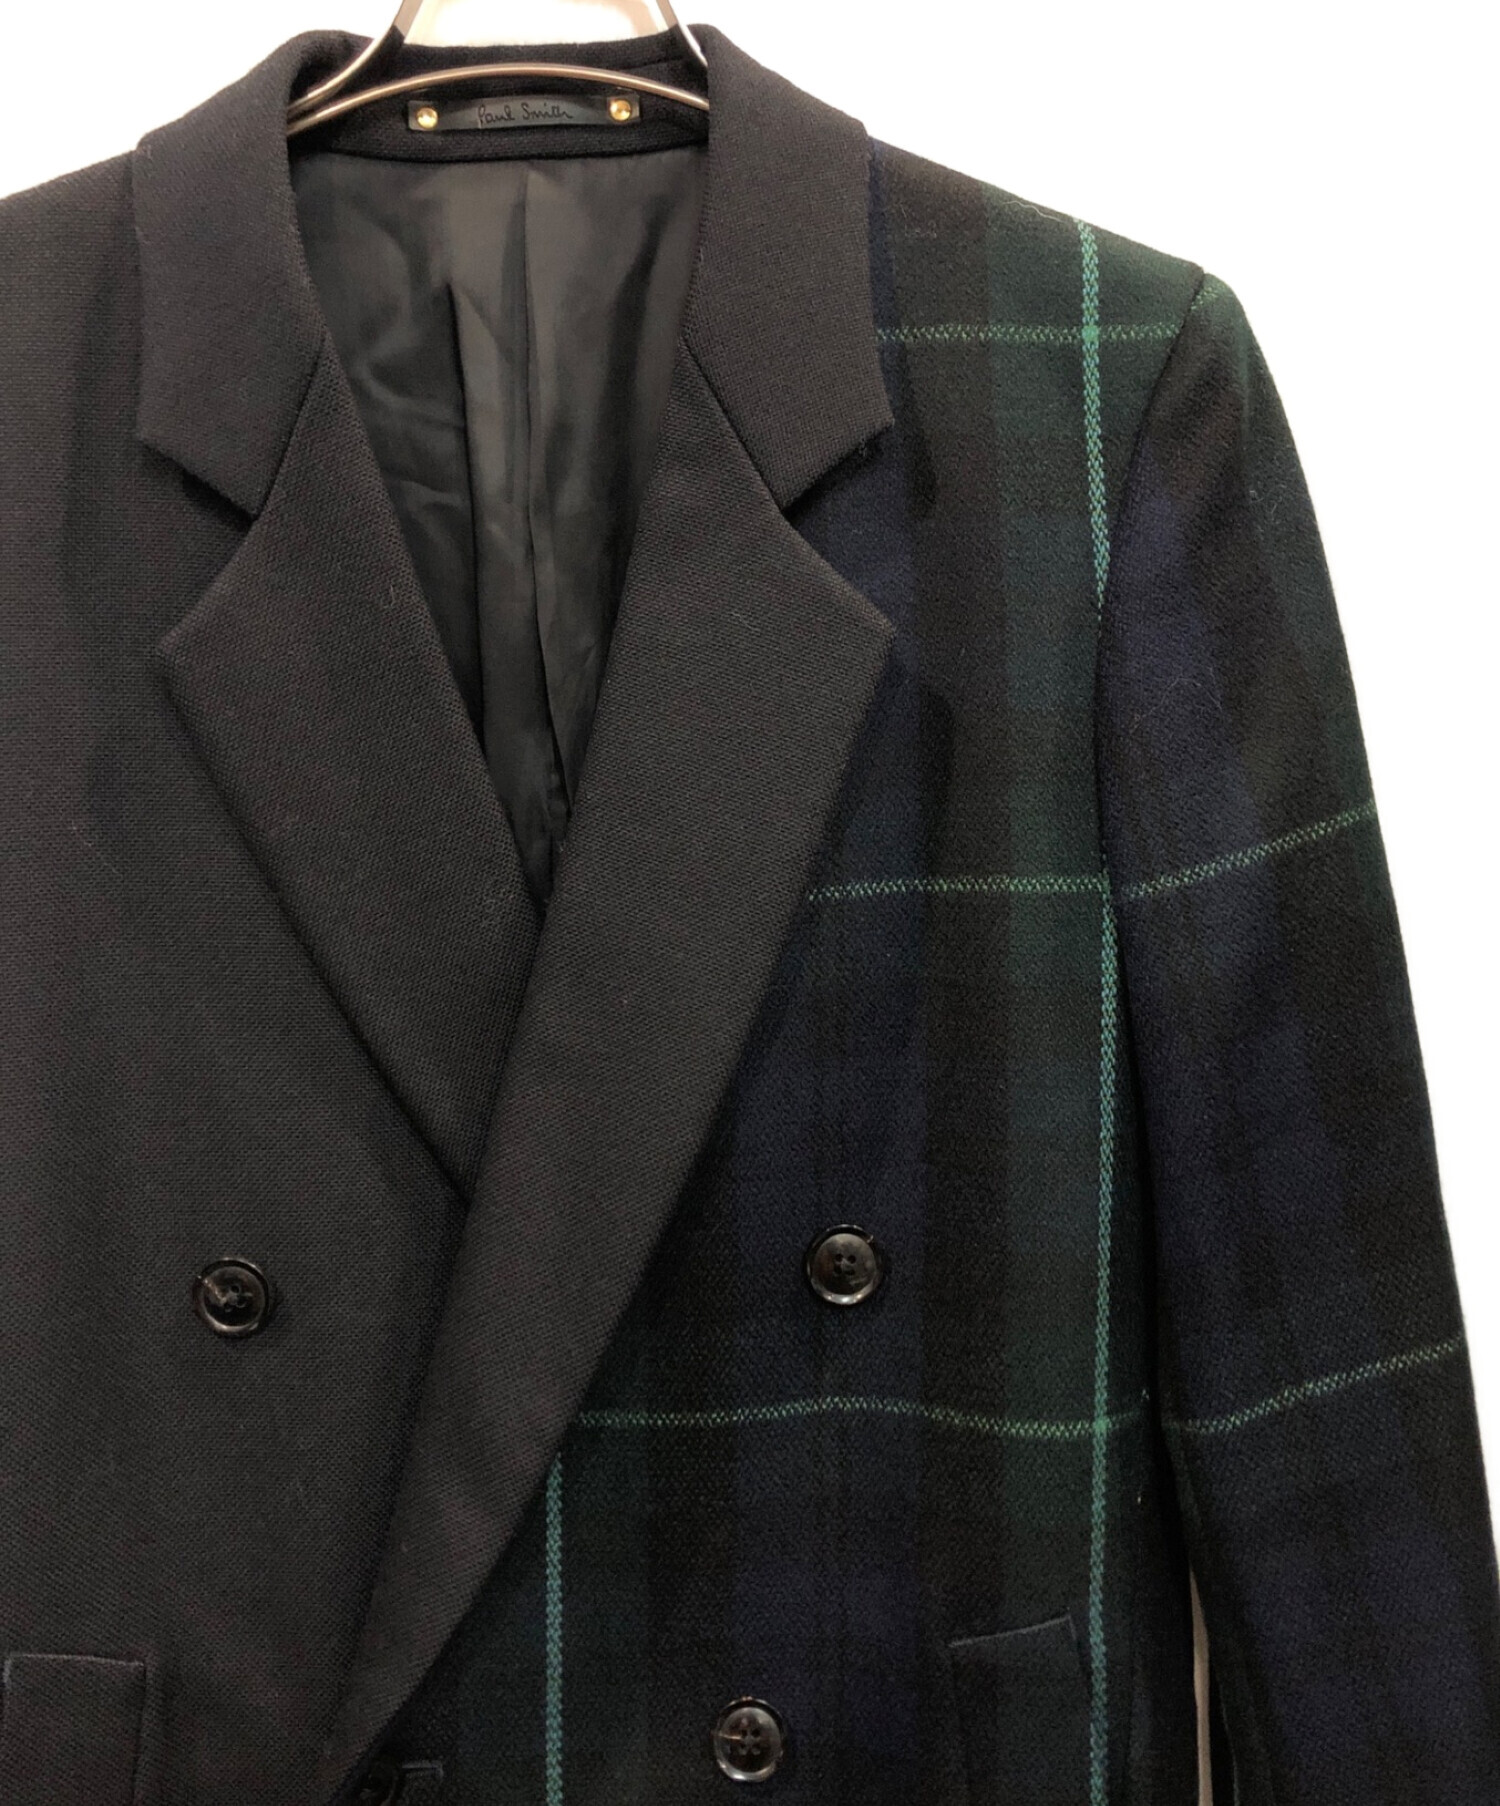 Paul Smith (ポールスミス) DREAMER BLACK WATCH MIX UP DOUBLE-BREASTED COAT グリーン  サイズ:S